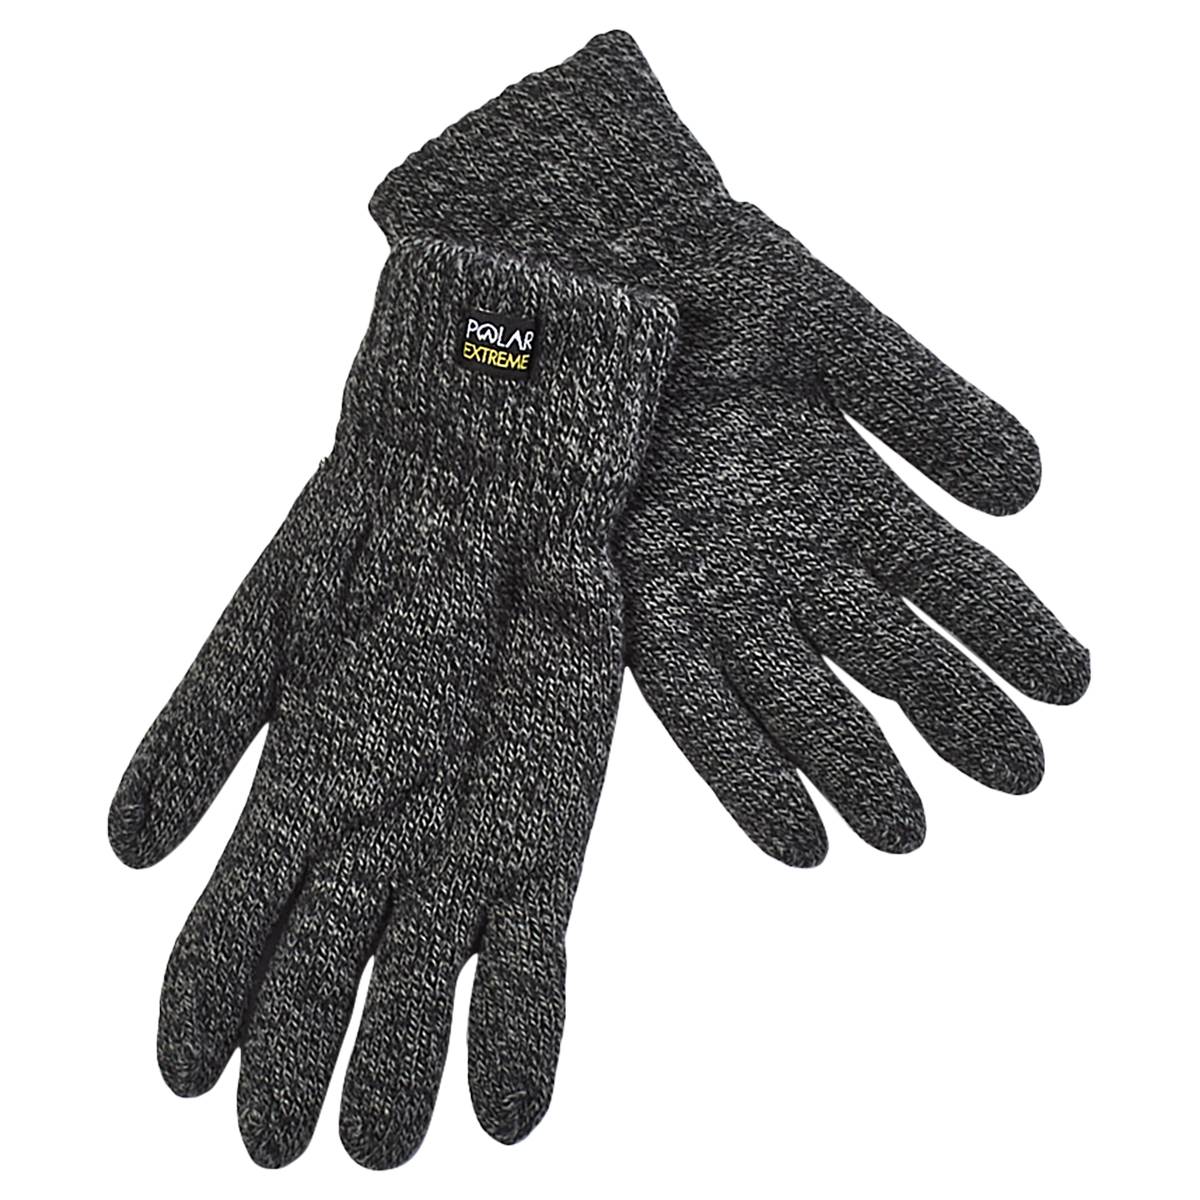 Mens Polar Extreme Insulated Thermal Gloves